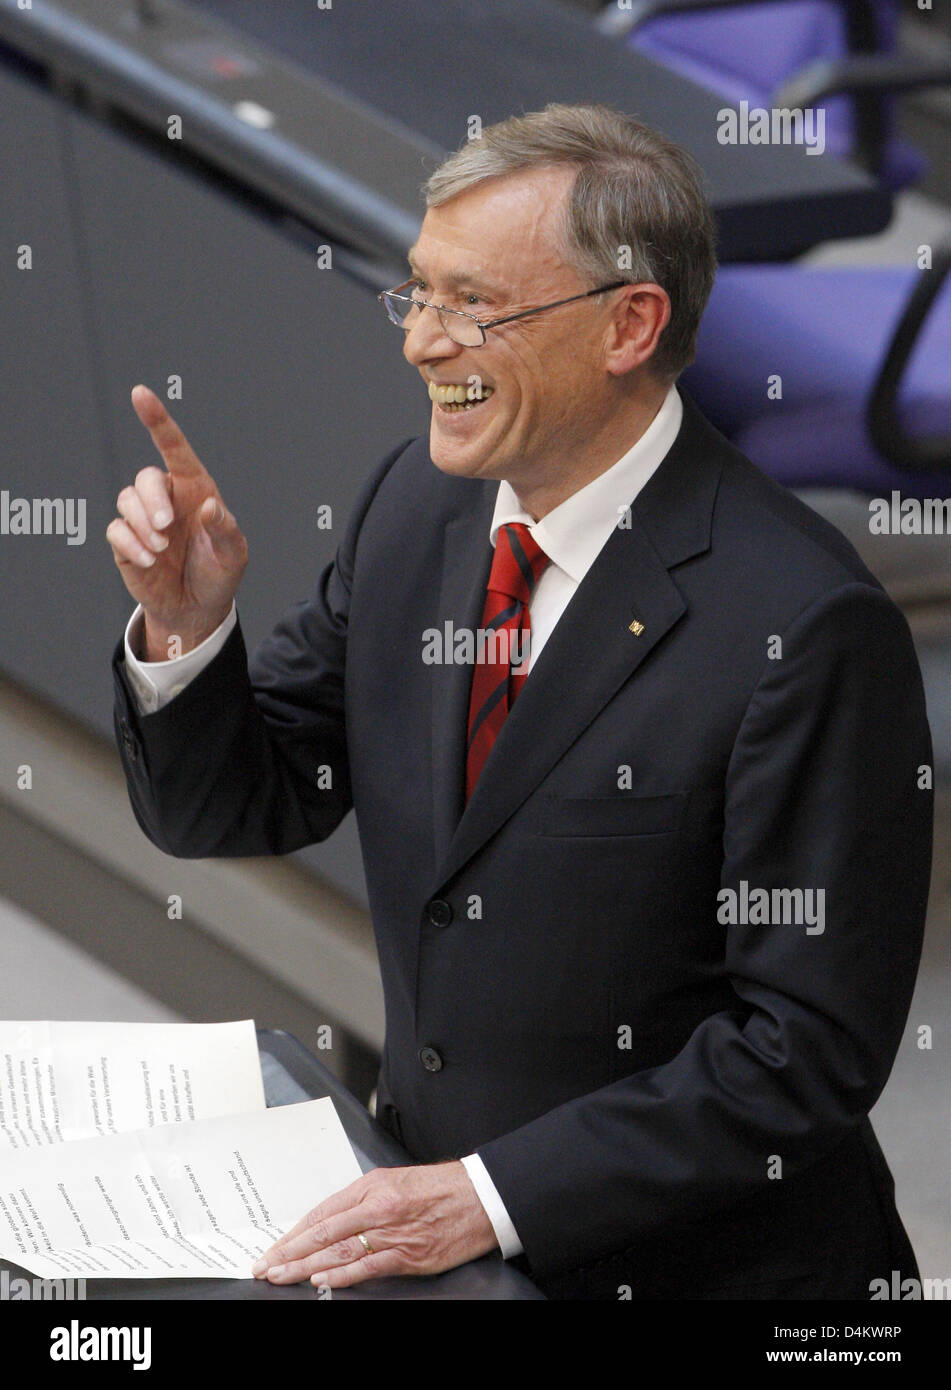 Federal German President Horst Koehler laughs during his speech after his reelection at the 13th Federal Convention in the plenar hall of the Reichstag building in Berlin, Germany, 23 May 2009. Koehler won the election with 613 votes, the minimum number of necessary votes. Photo: Bernd Settnik Stock Photo